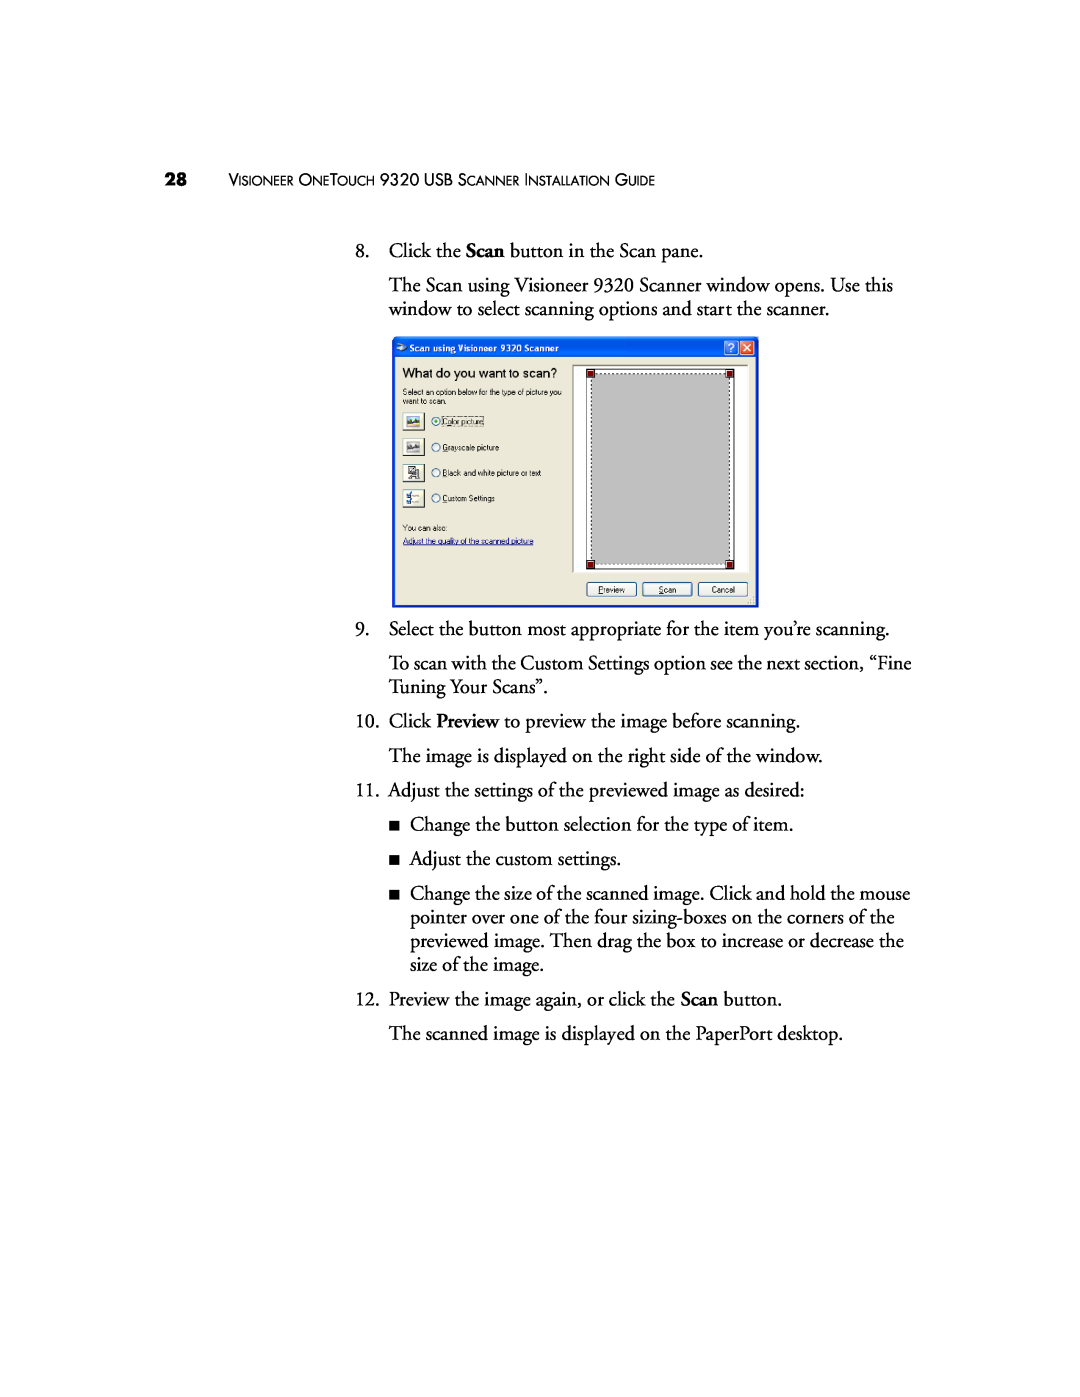 Visioneer manual VISIONEER ONETOUCH 9320 USB SCANNER INSTALLATION GUIDE 